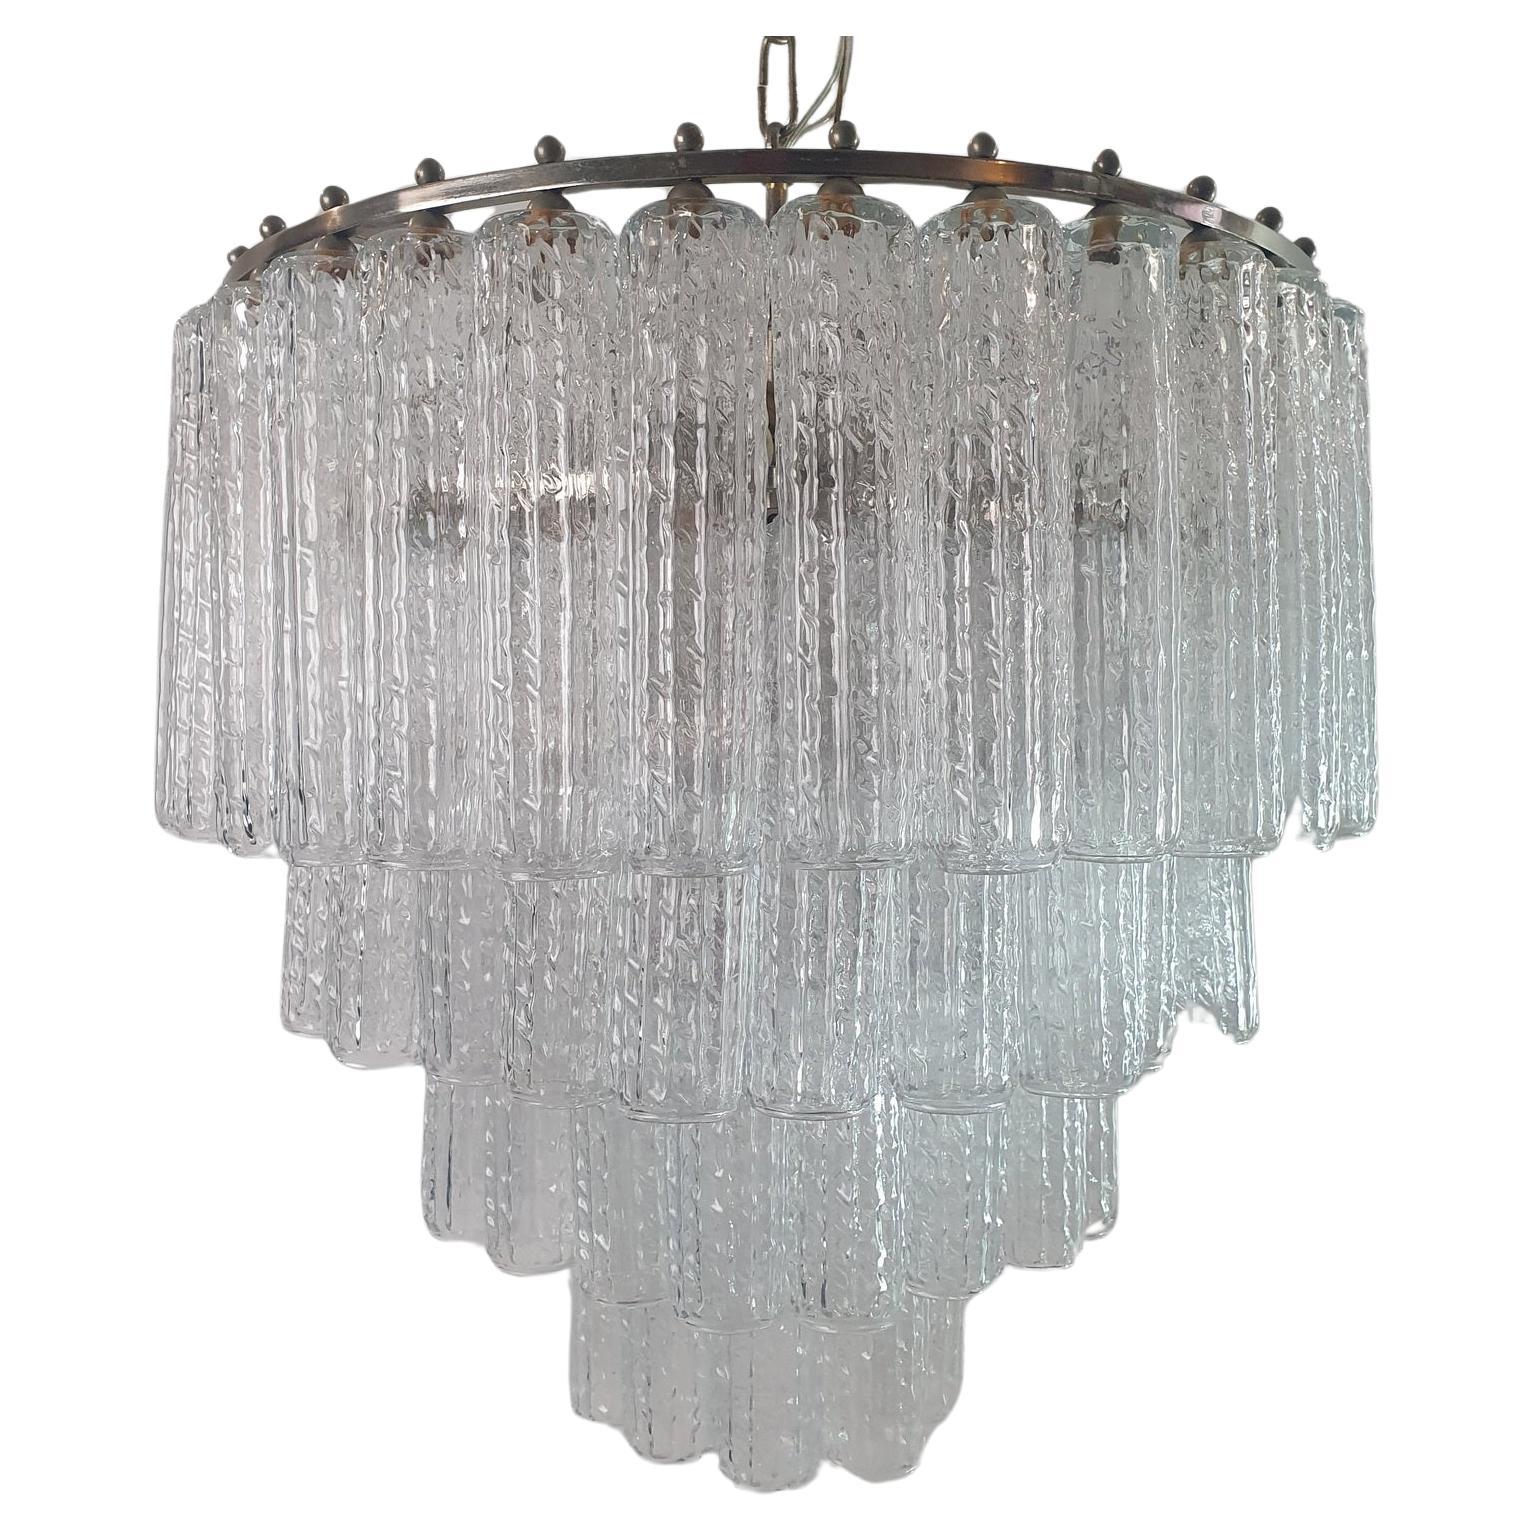 A midcentury chandelier with clear Murano glass tubes that cascades down from a metal structure. In great condition.
Total length with chain 100cm which can be made longer on request. Only the lamp measures 50 cm in height. Fitted for a total of 10